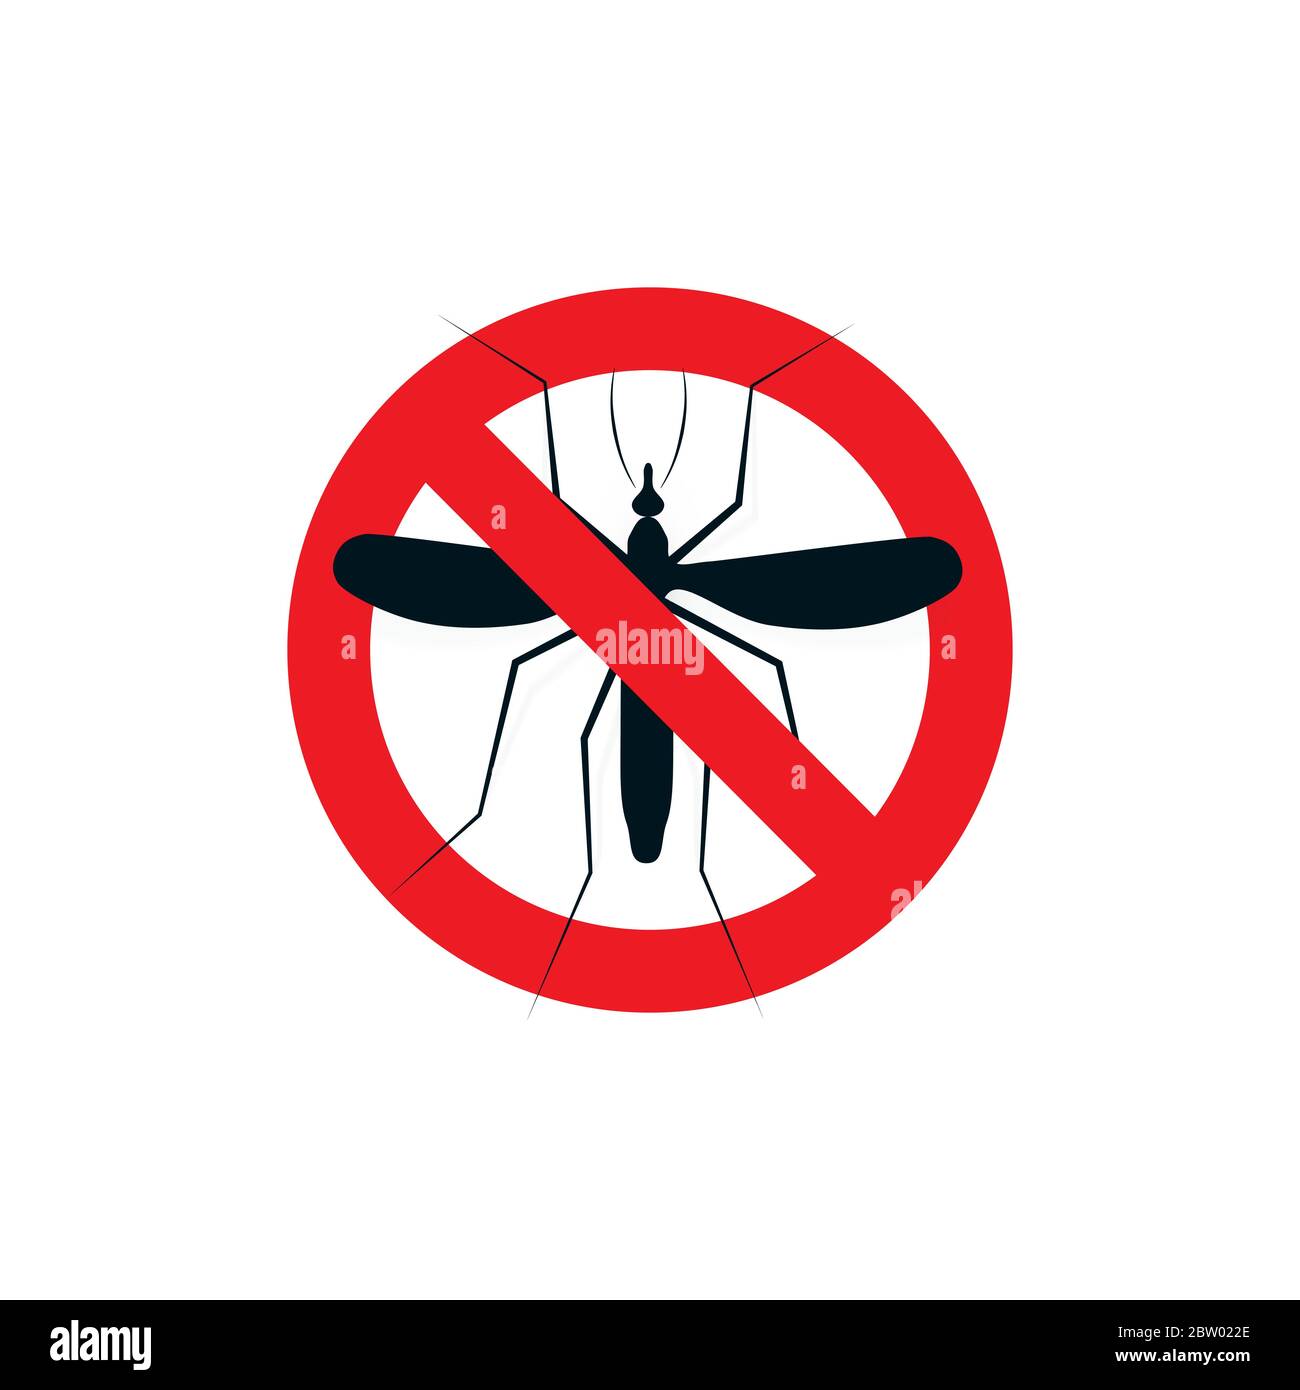 Anti mosquito repellent logo. Stop insects spray icon. Dangerous bloodsucking flying midge caution logo. Disease transmitters sign. Red crossed circle Stock Vector